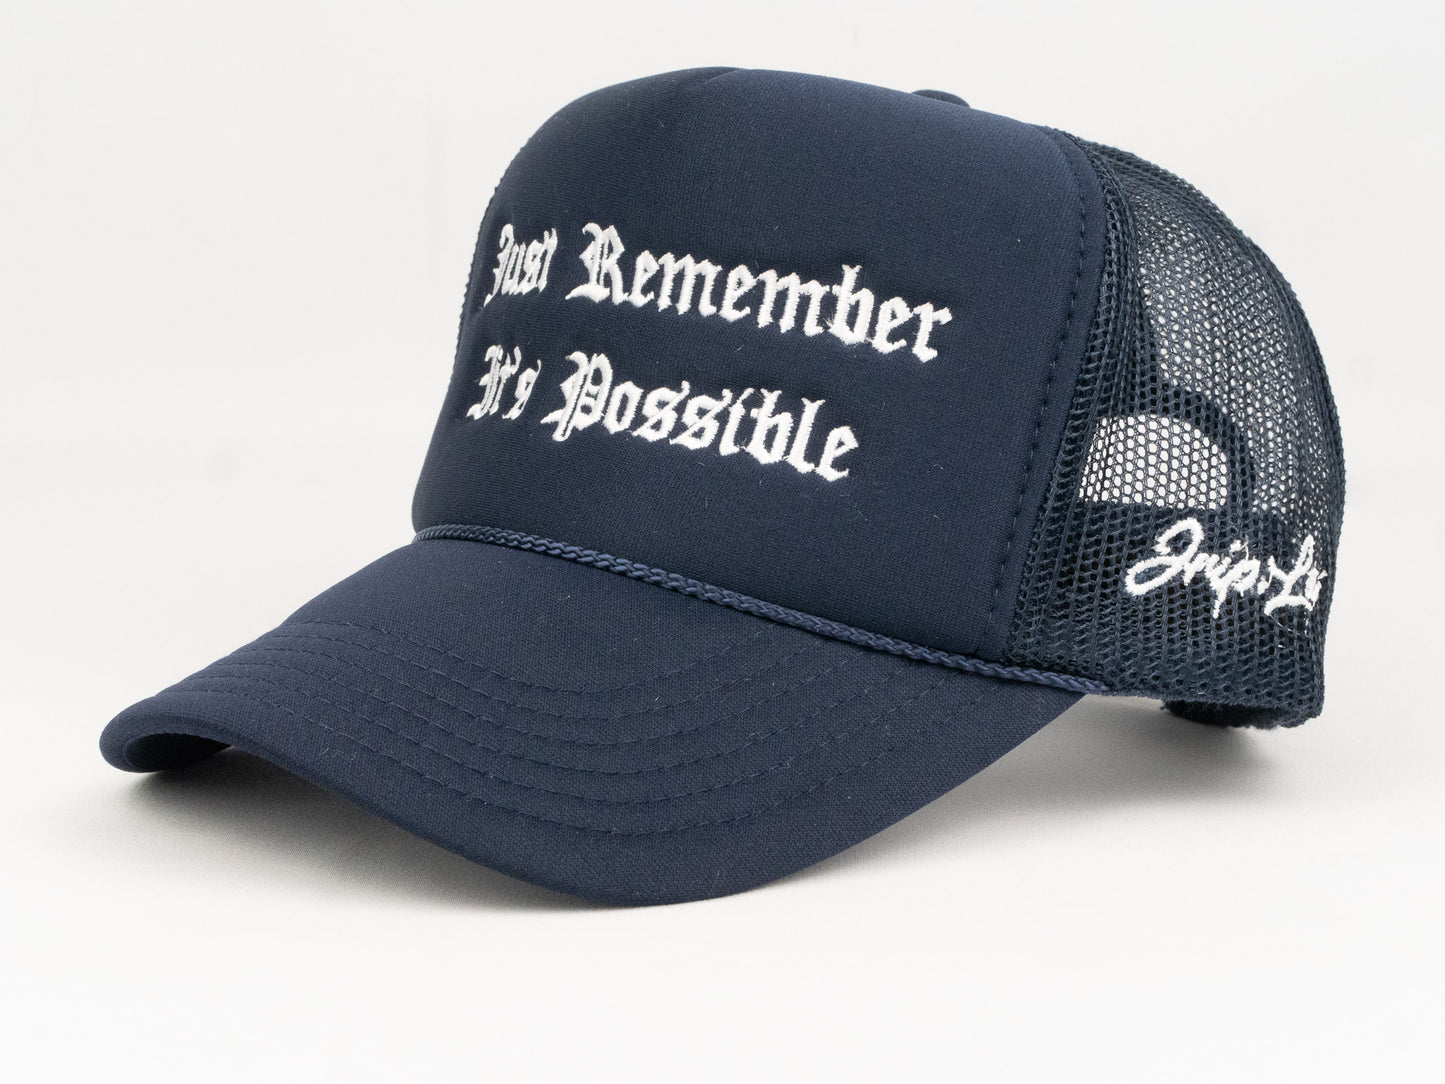 Just Remember It's Possible Trucker Hat (NAVY BLUE)